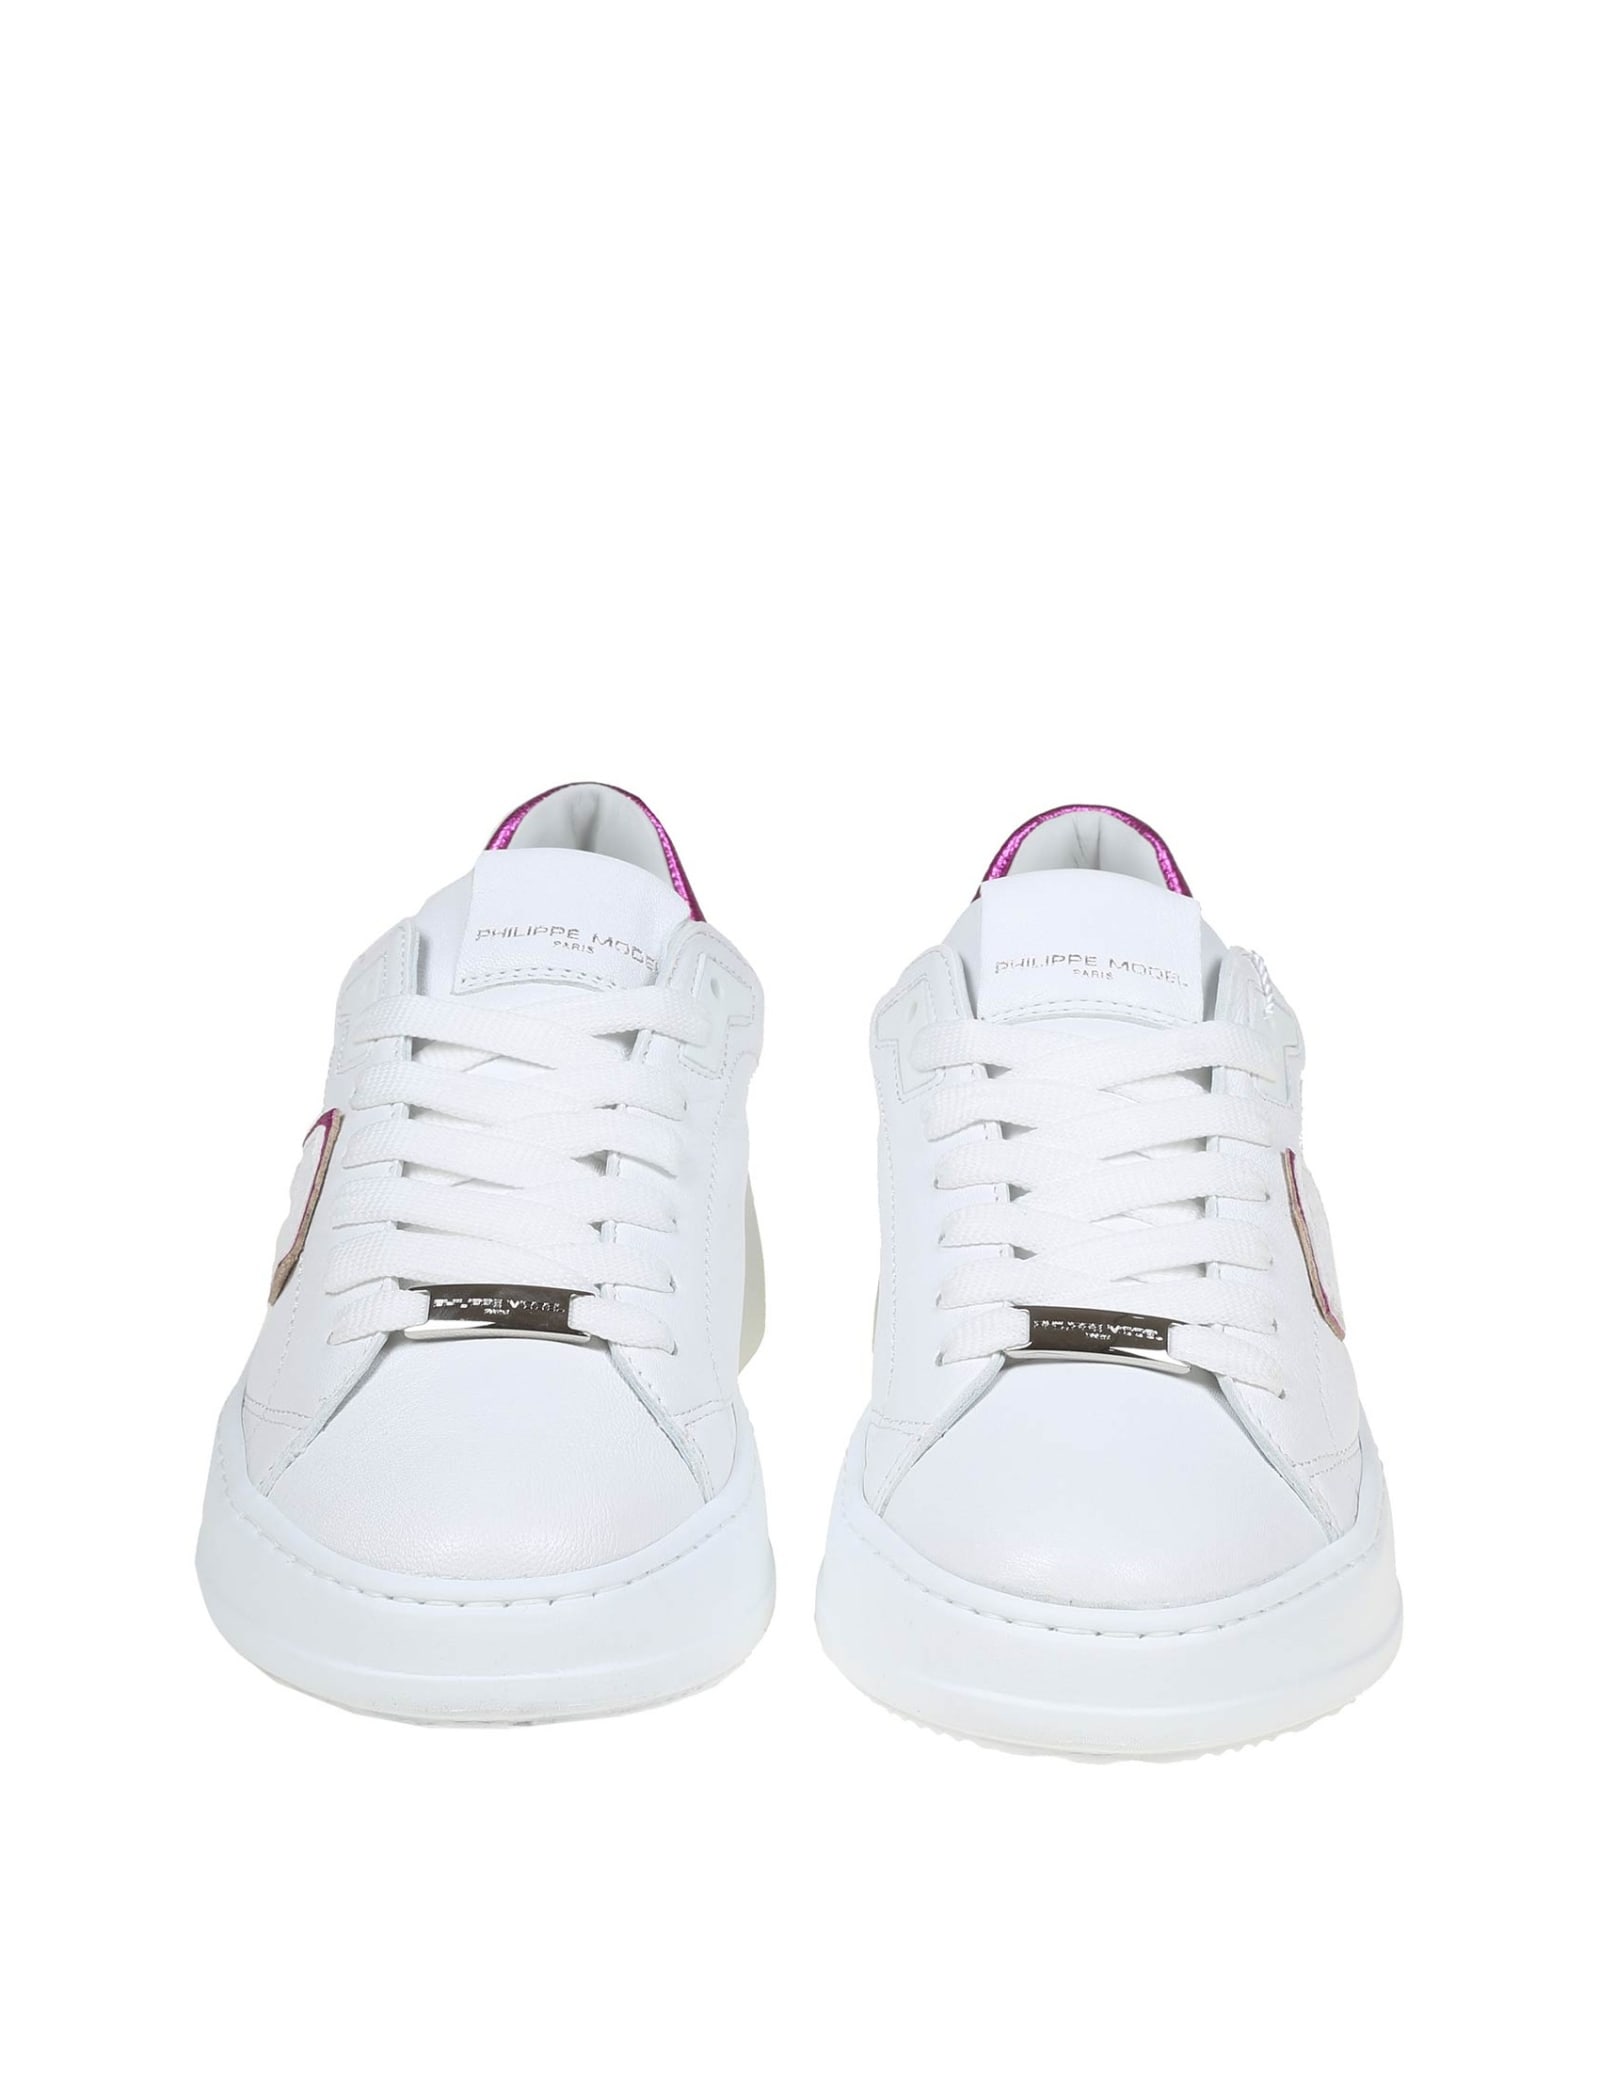 Shop Philippe Model Tres Temple Low In White And Fuchsia Color Leather In Blanc/fucsia